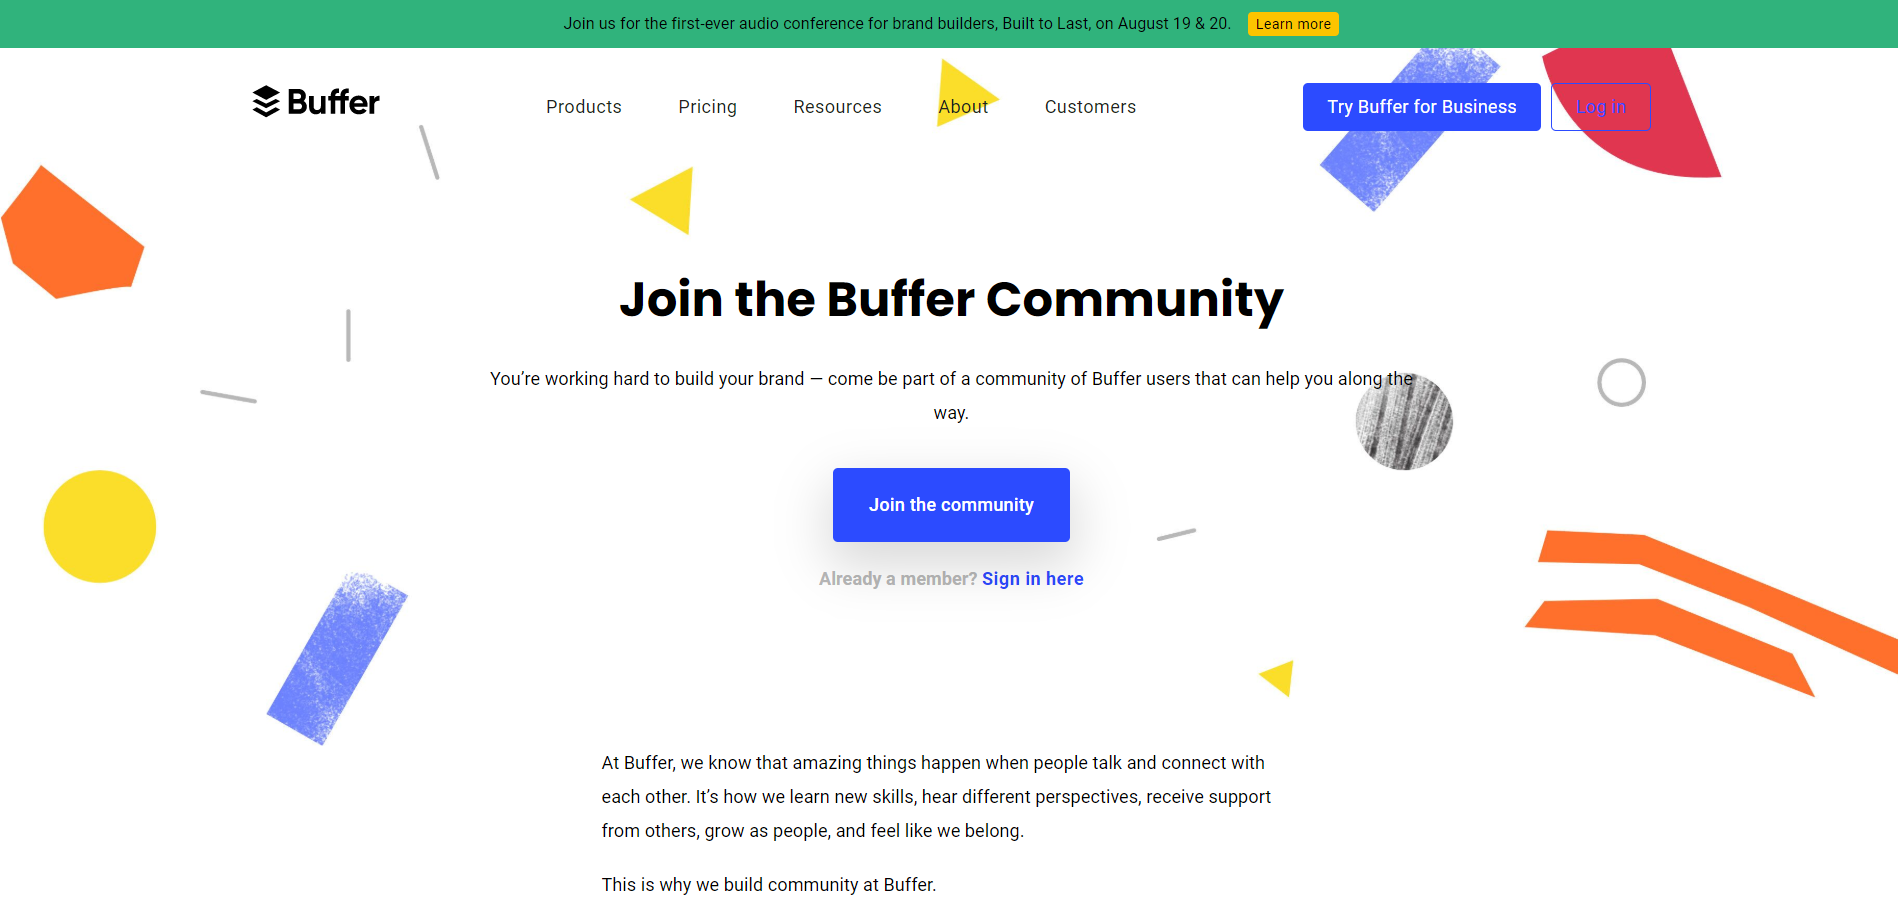 This is an example of community building by Buffer